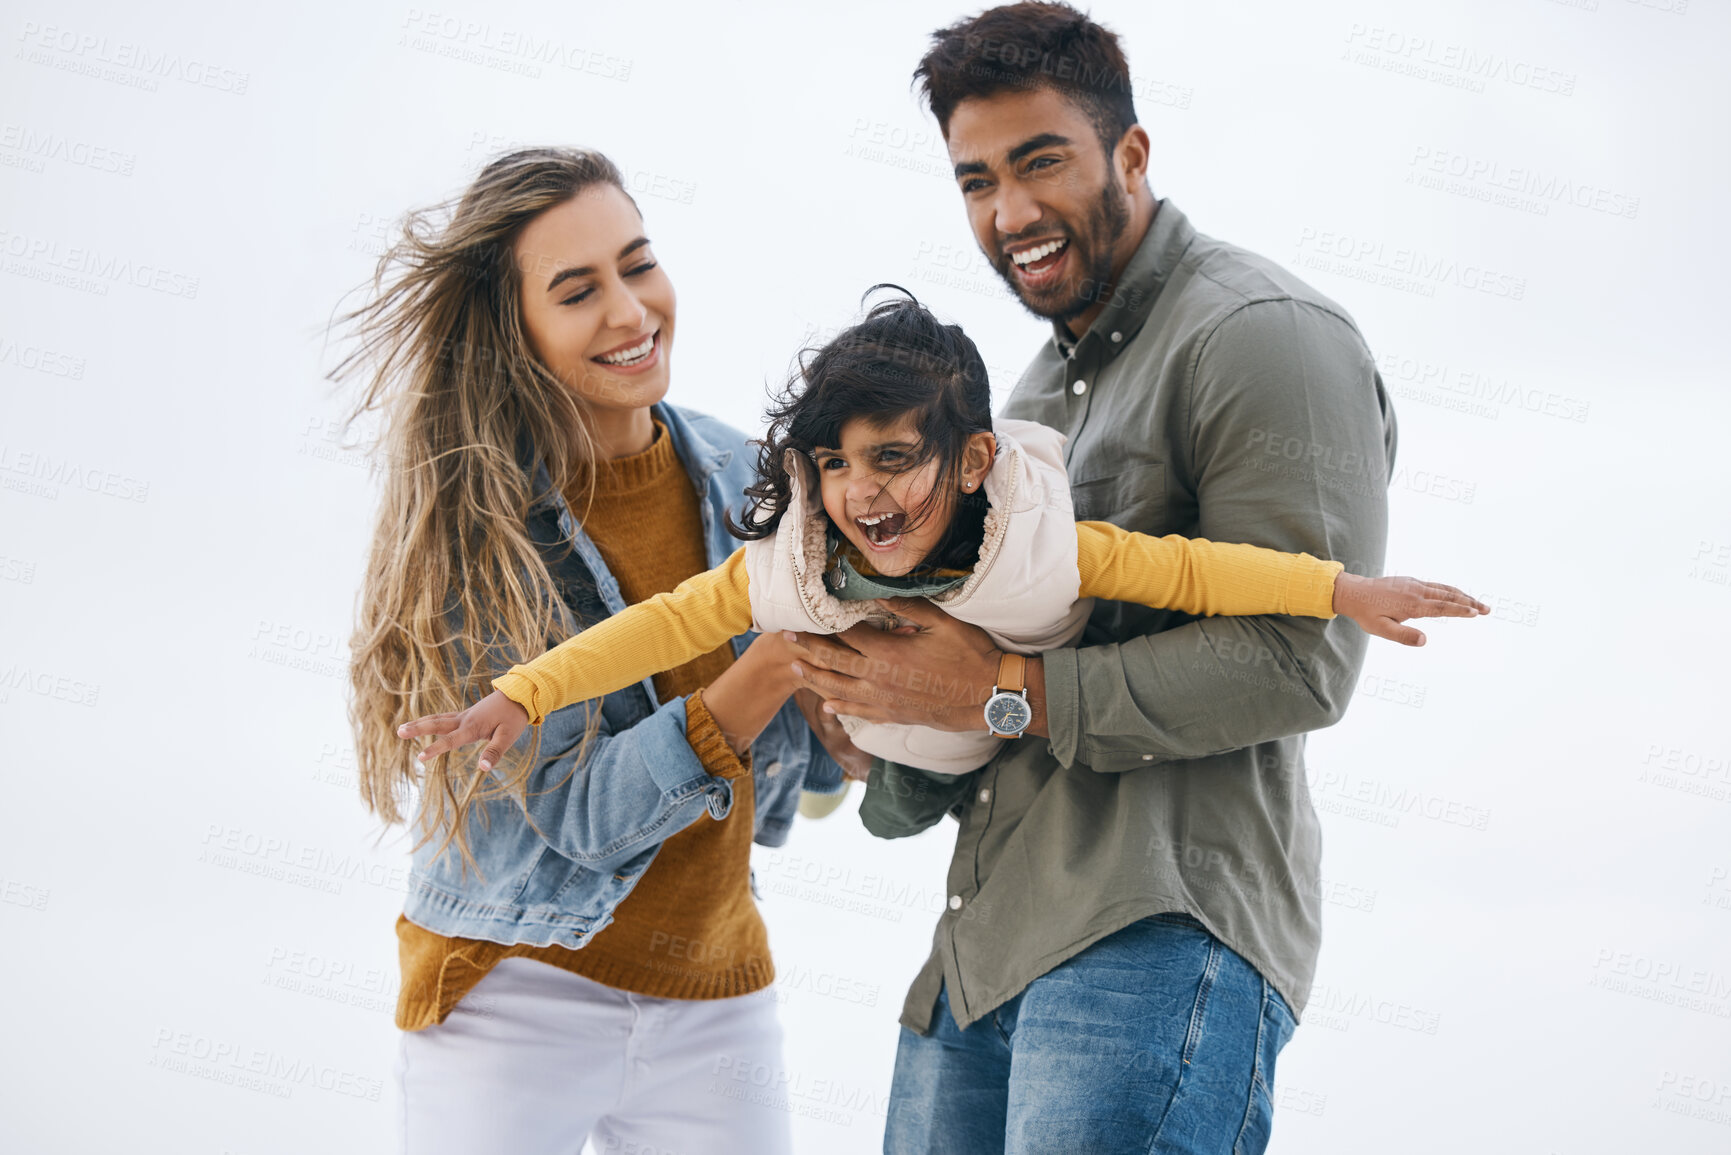 Buy stock photo Airplane, sky background or child with parents playing for a family bond with love, smile or care. Mom, flying or happy Indian dad with a girl kid to enjoy fun outdoor games on a holiday together